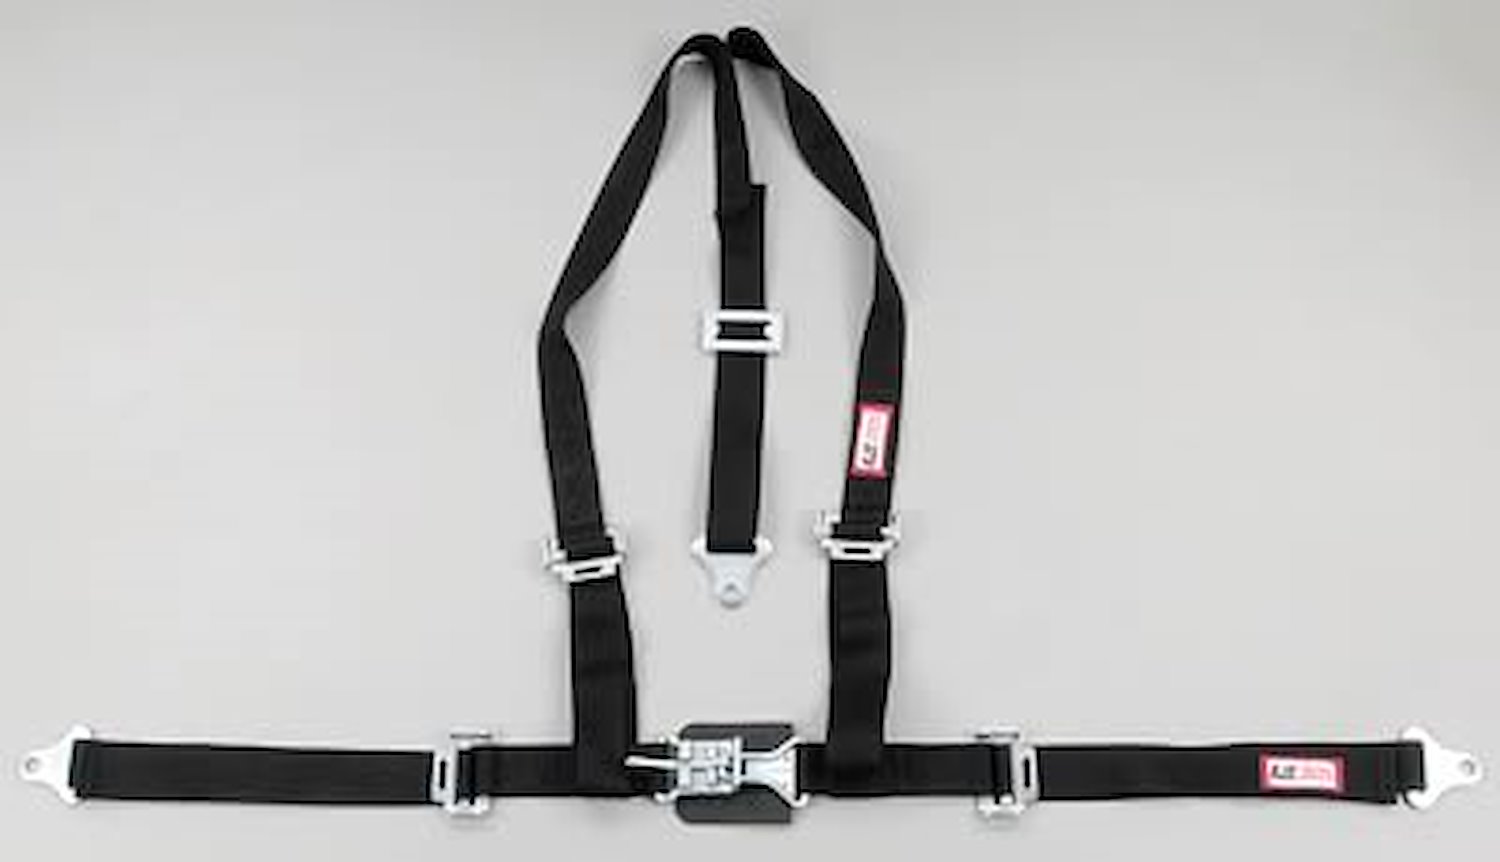 NON-SFI L&L HARNESS 3 PULL UP Lap BELT SNAP SEWN IN 2 S.H. Y FLOOR Mount w/STERNUM STRAP WRAP/SNAP YELLOW